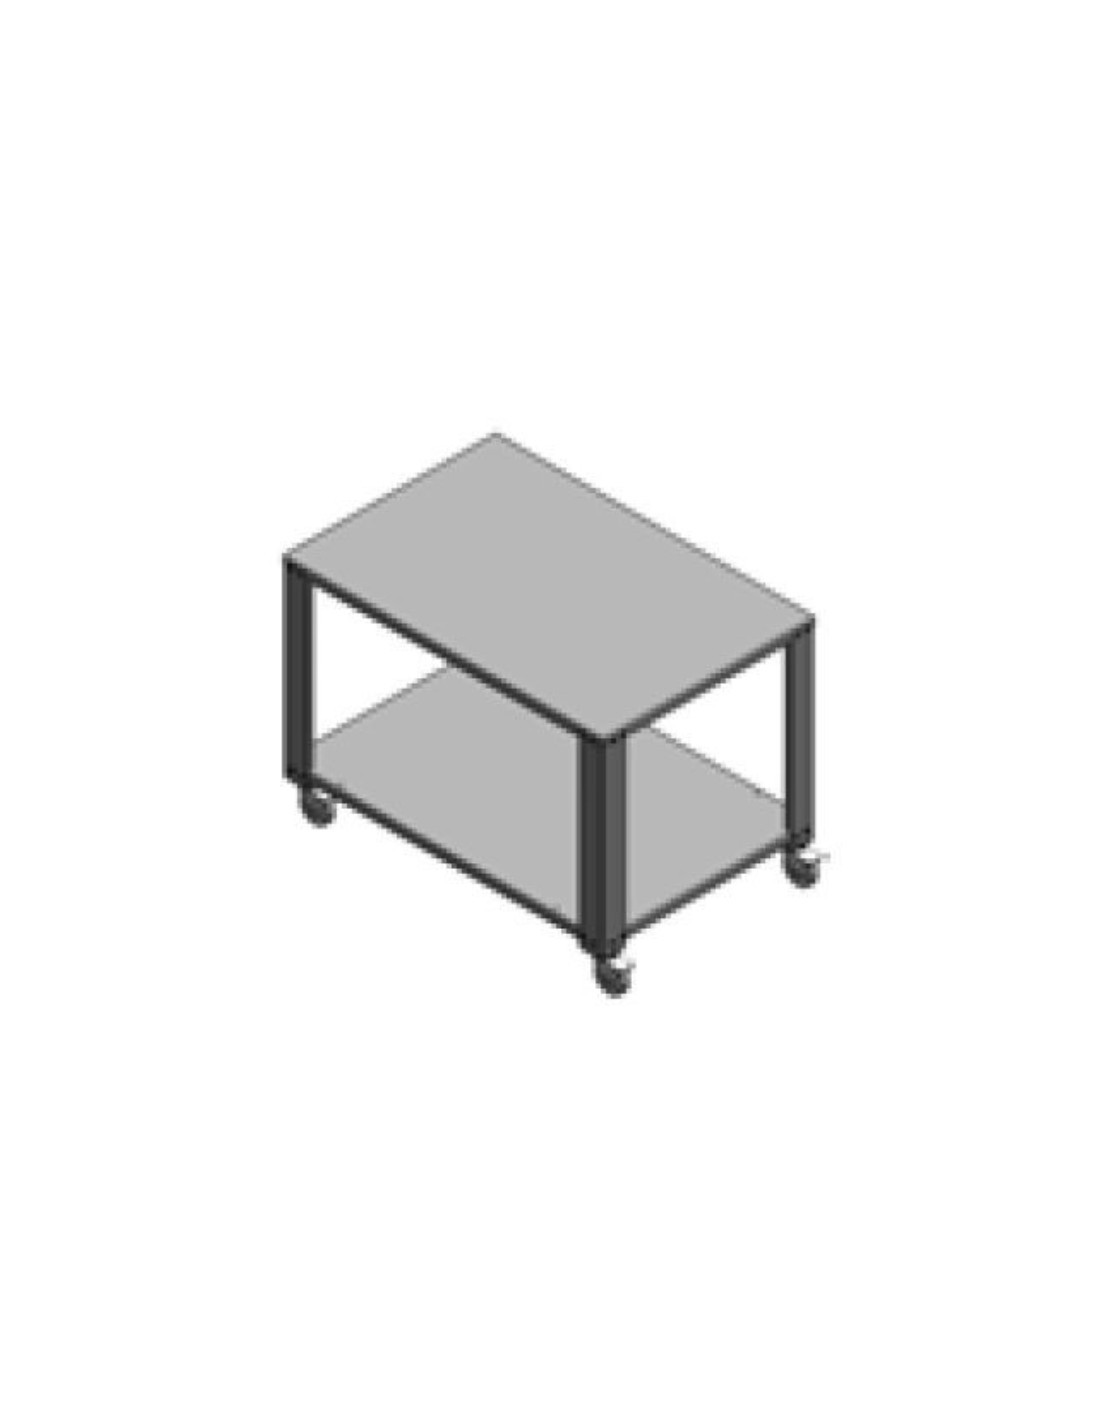 Fixed table in Aisi 430 with wheels - cm 61 x 63 x 88.3 h - For EKF 423, EKF 443 and EKF 523 (in all versions) and EKF 412